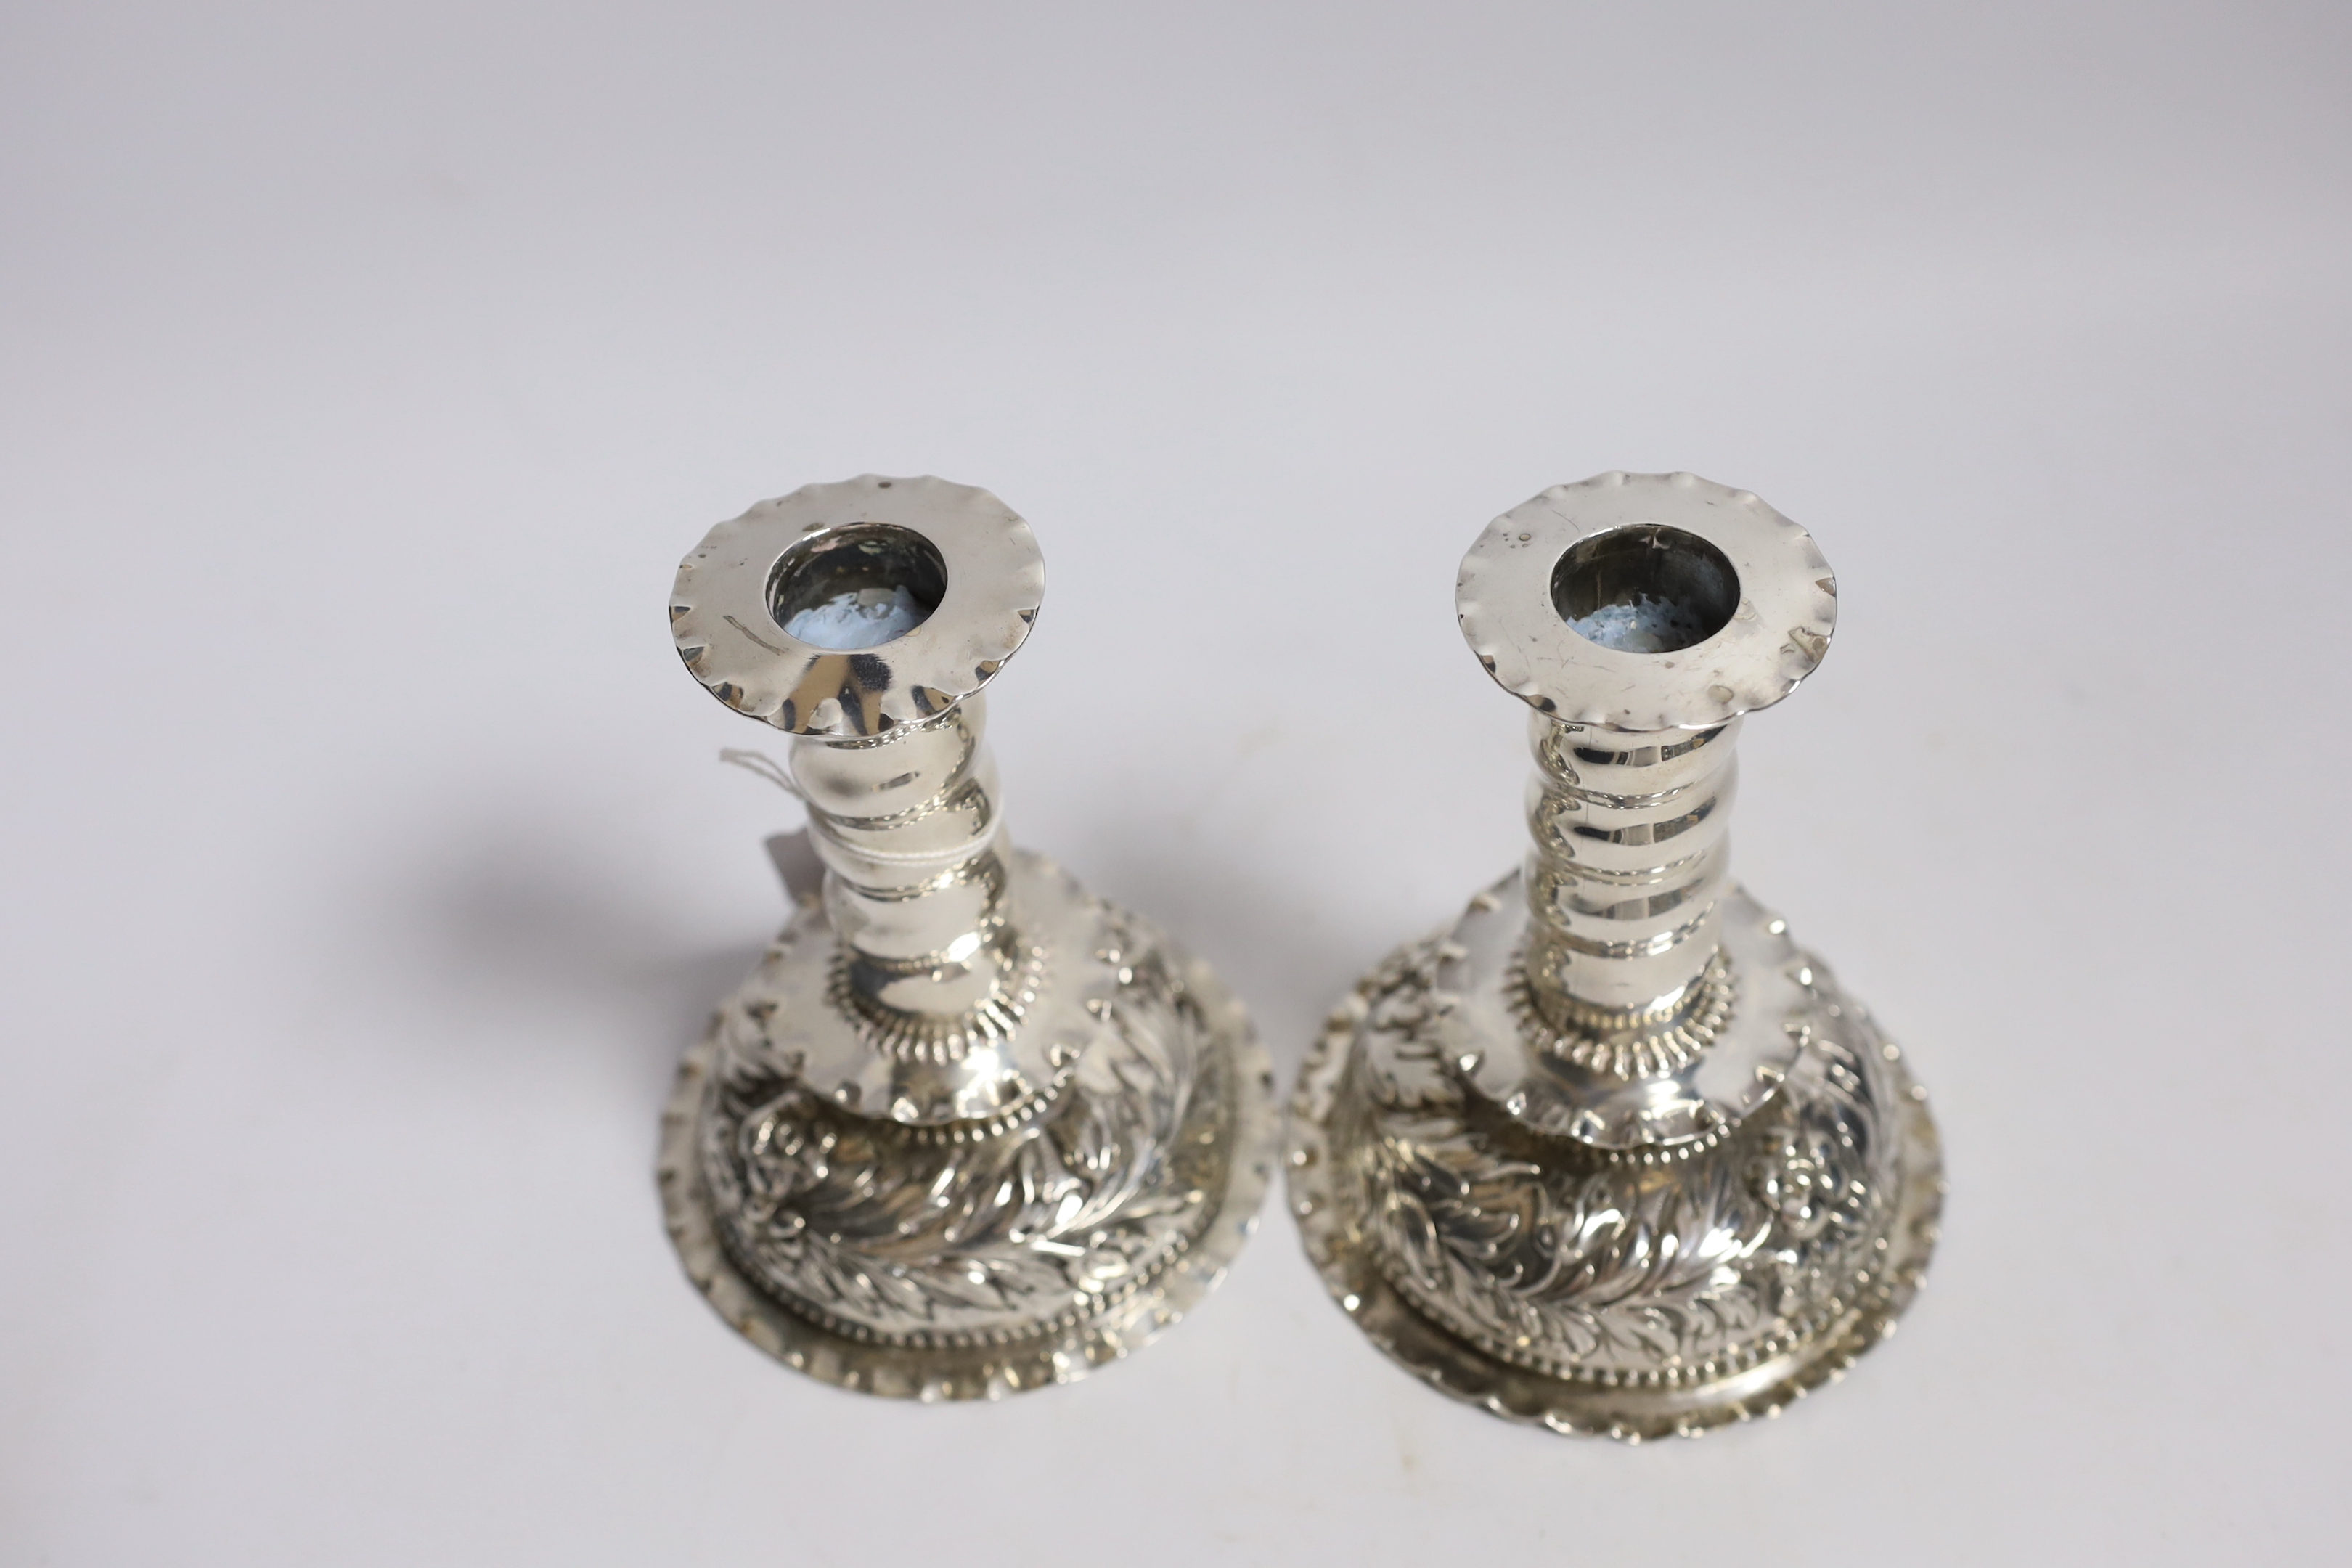 A matched pair of Carolean style silver dwarf candlesticks, London, 1880 & 1885, makers mark on one for George Fox, silver disc to base marked for Charles Stuart Harris, height 12.3cm, weighted.